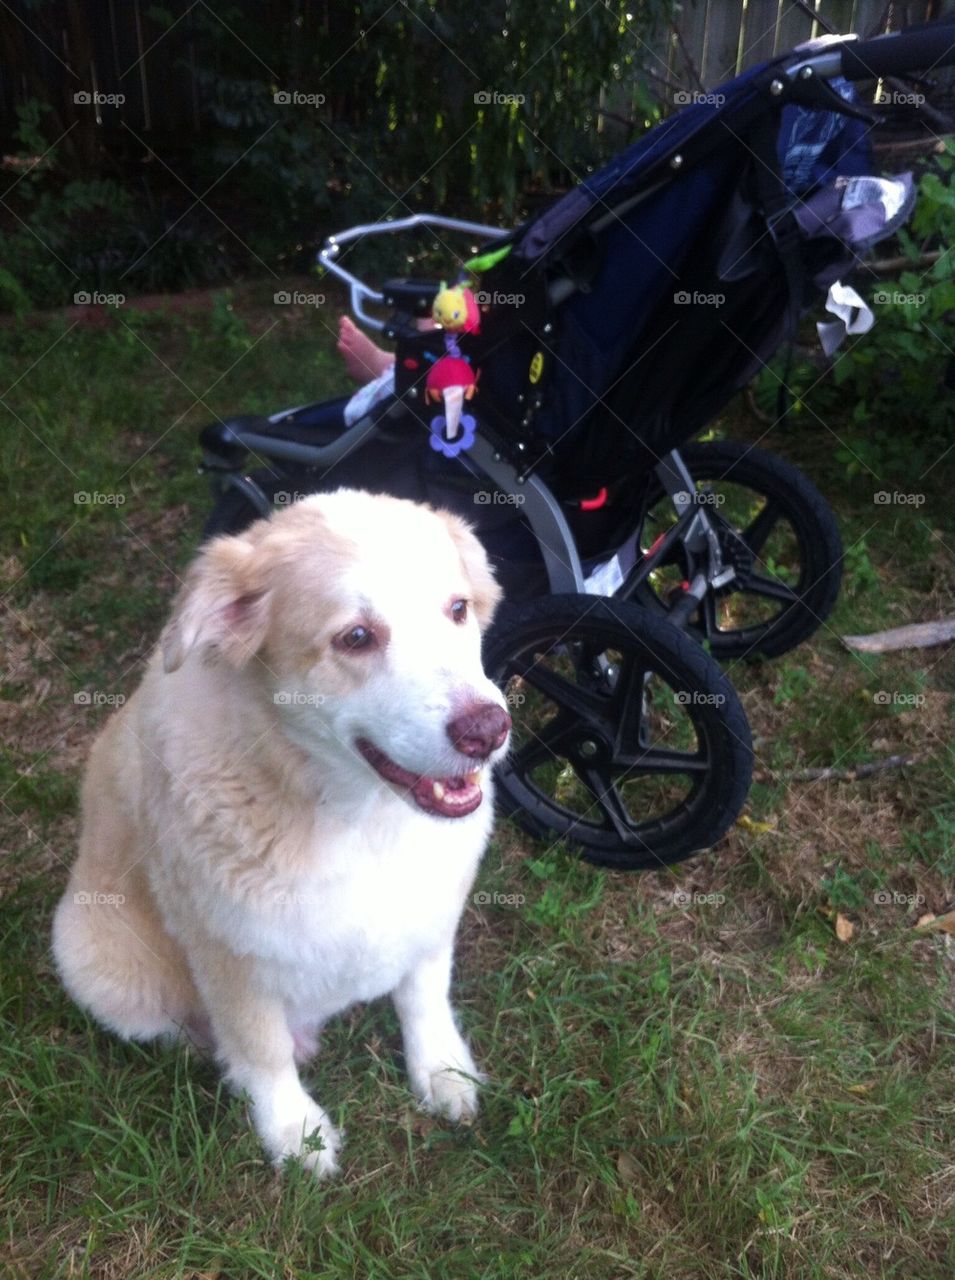 Great Pyrenees Australian Shepard mix with baby stroller